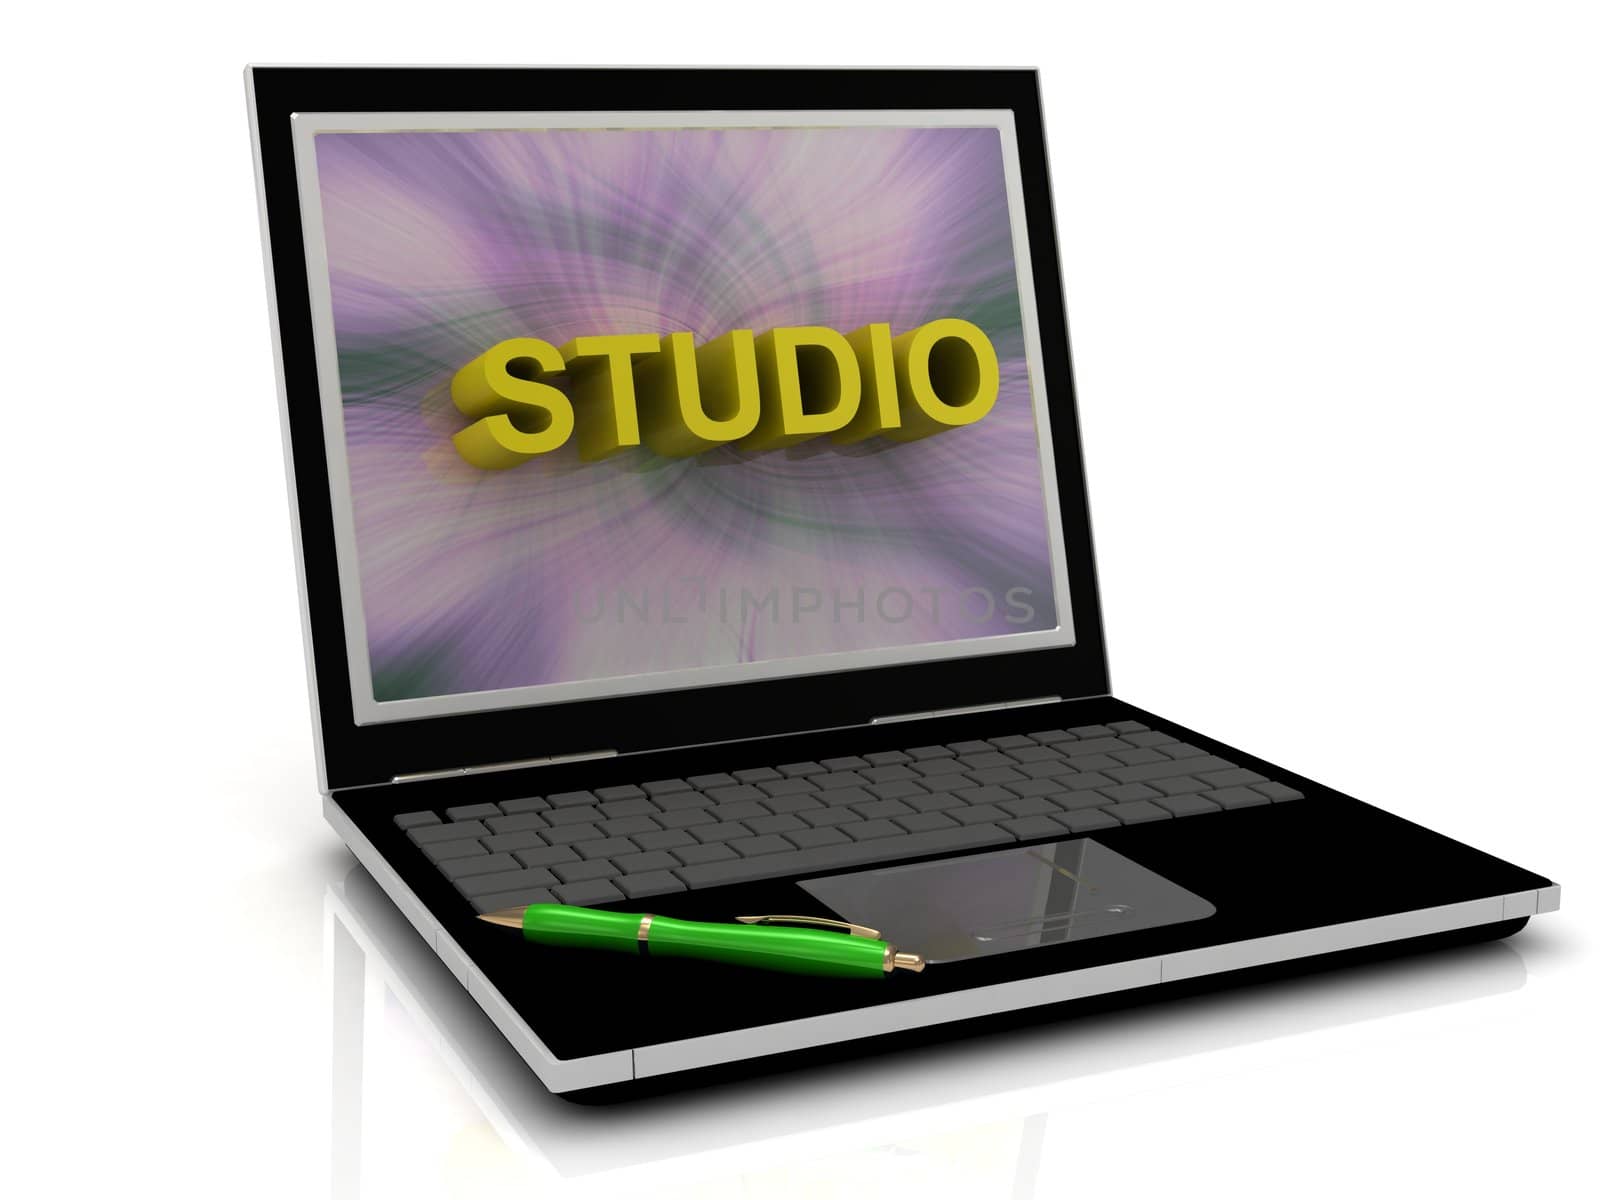 STUDIO message on laptop screen in big letters. 3D illustration isolated on white background